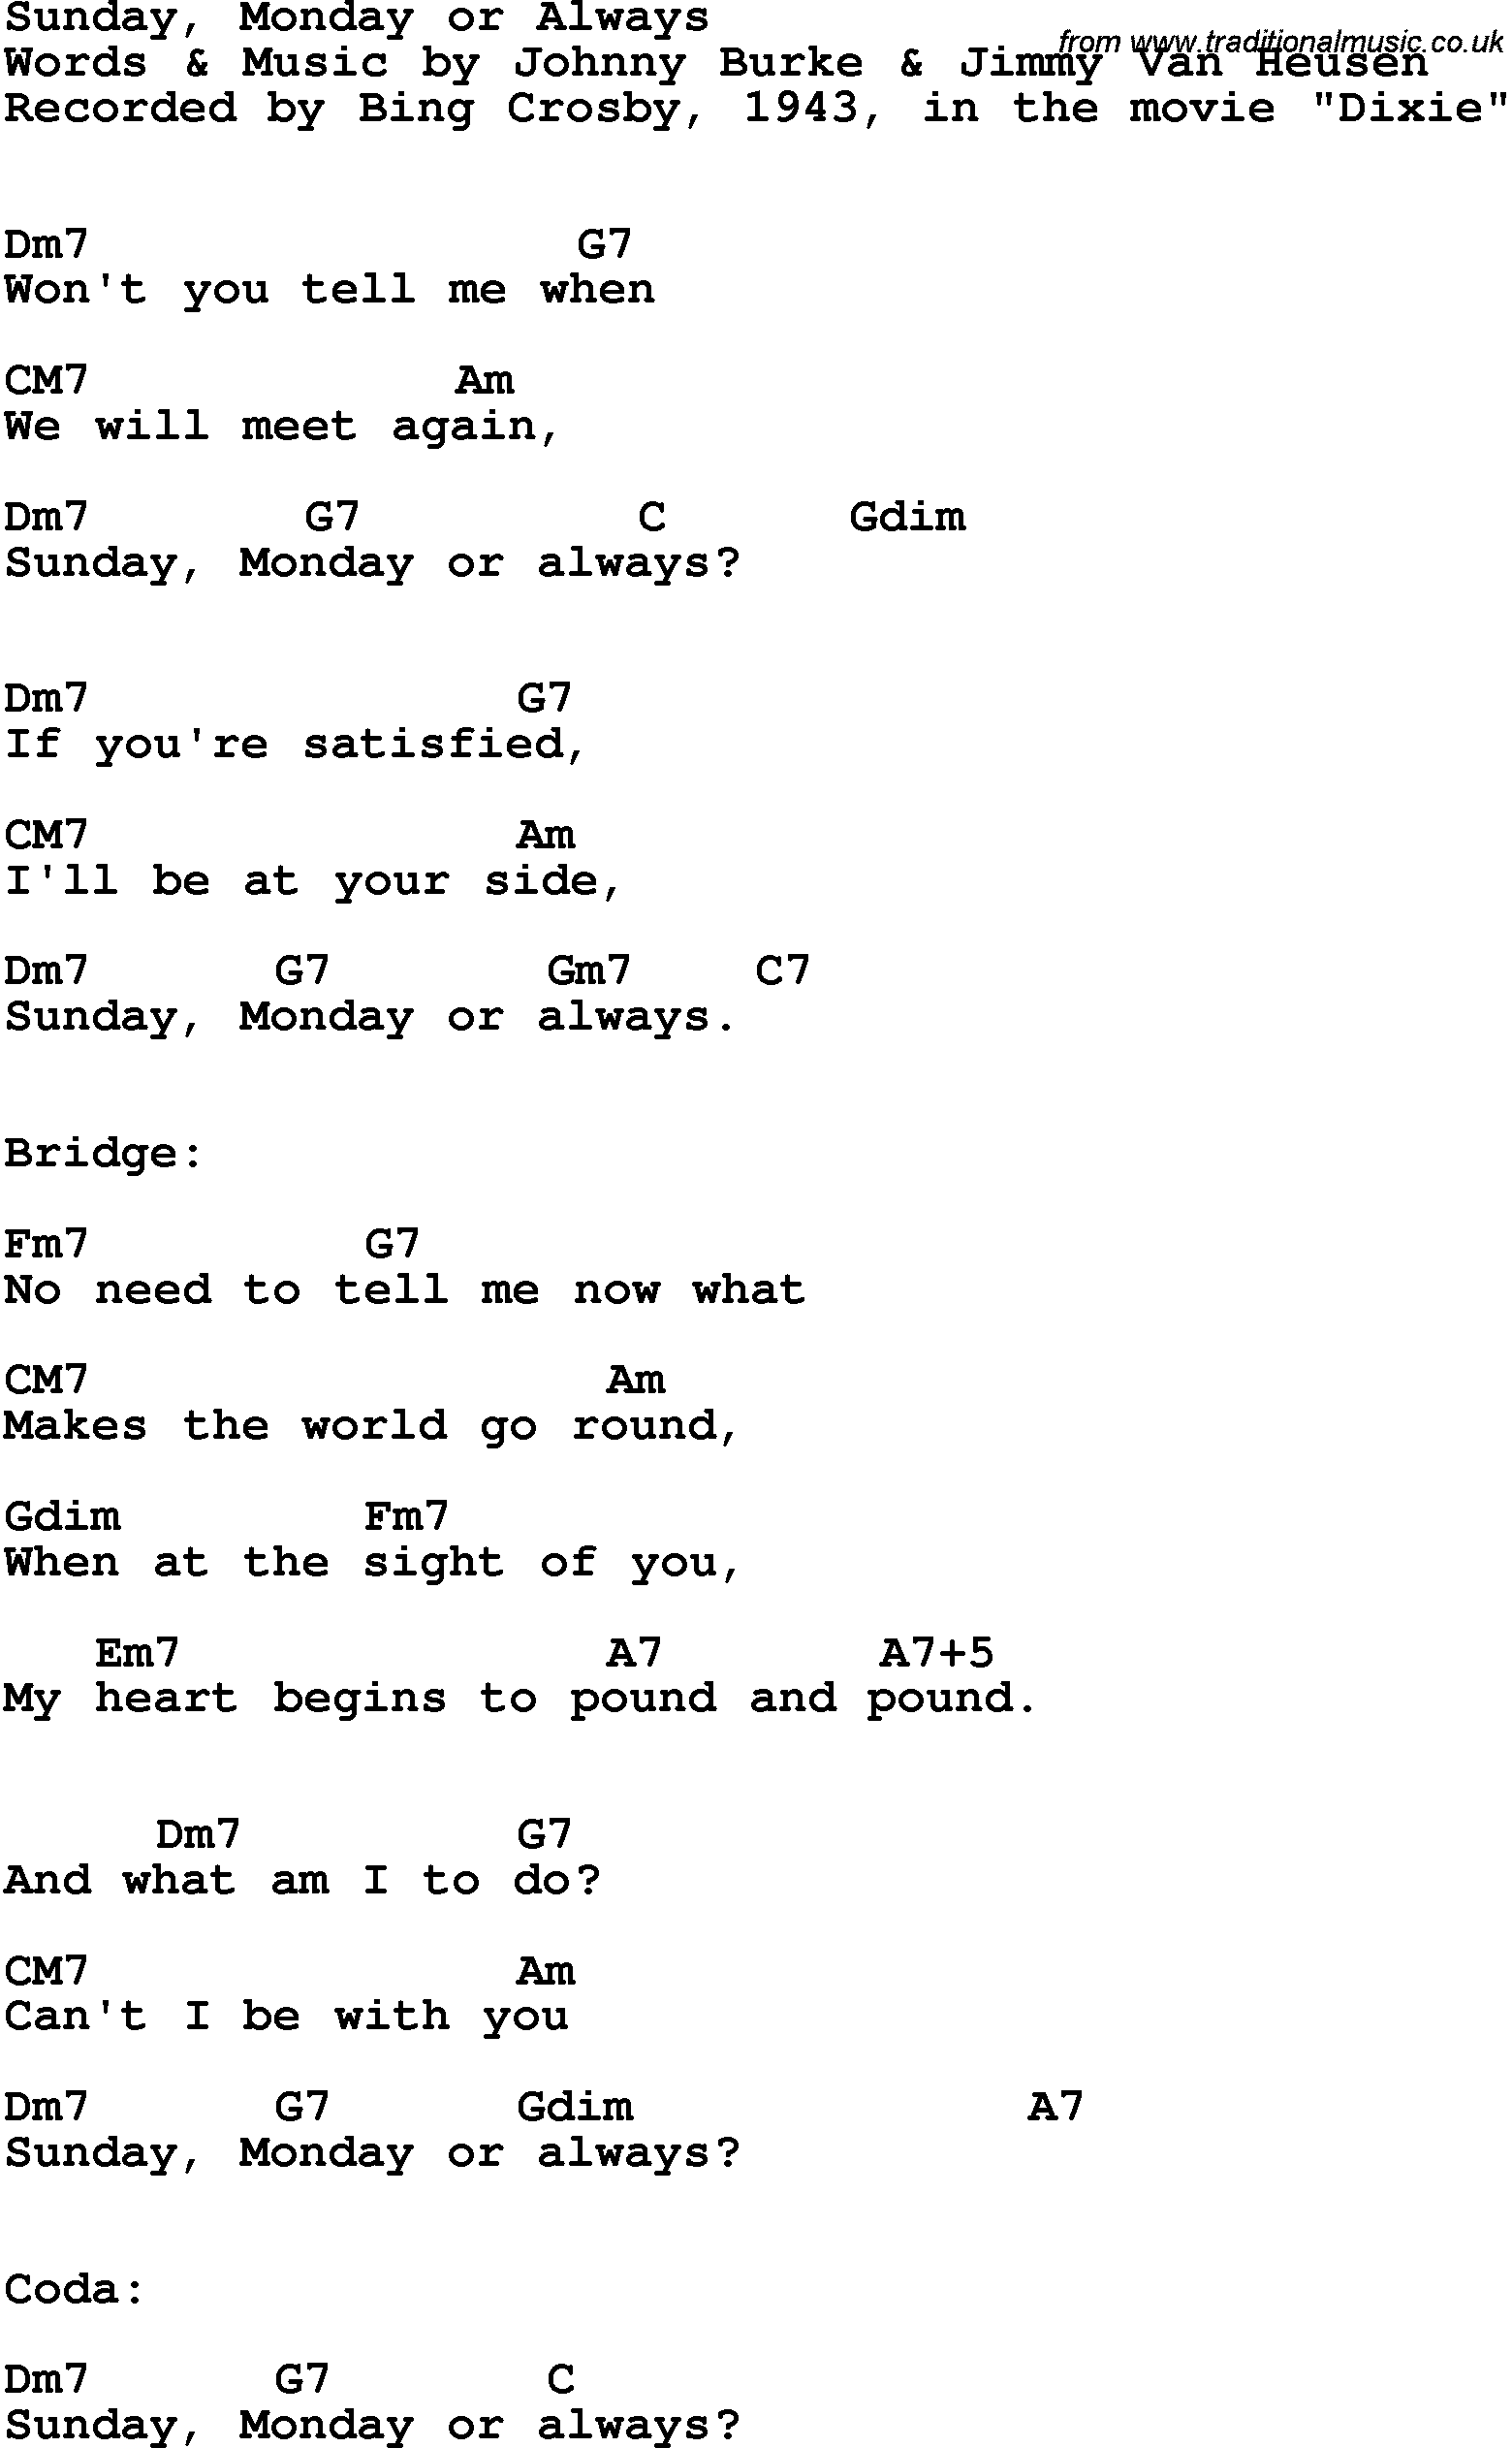 Song Lyrics with guitar chords for Sunday, Monday Or Always - Bing Crosby, 1943